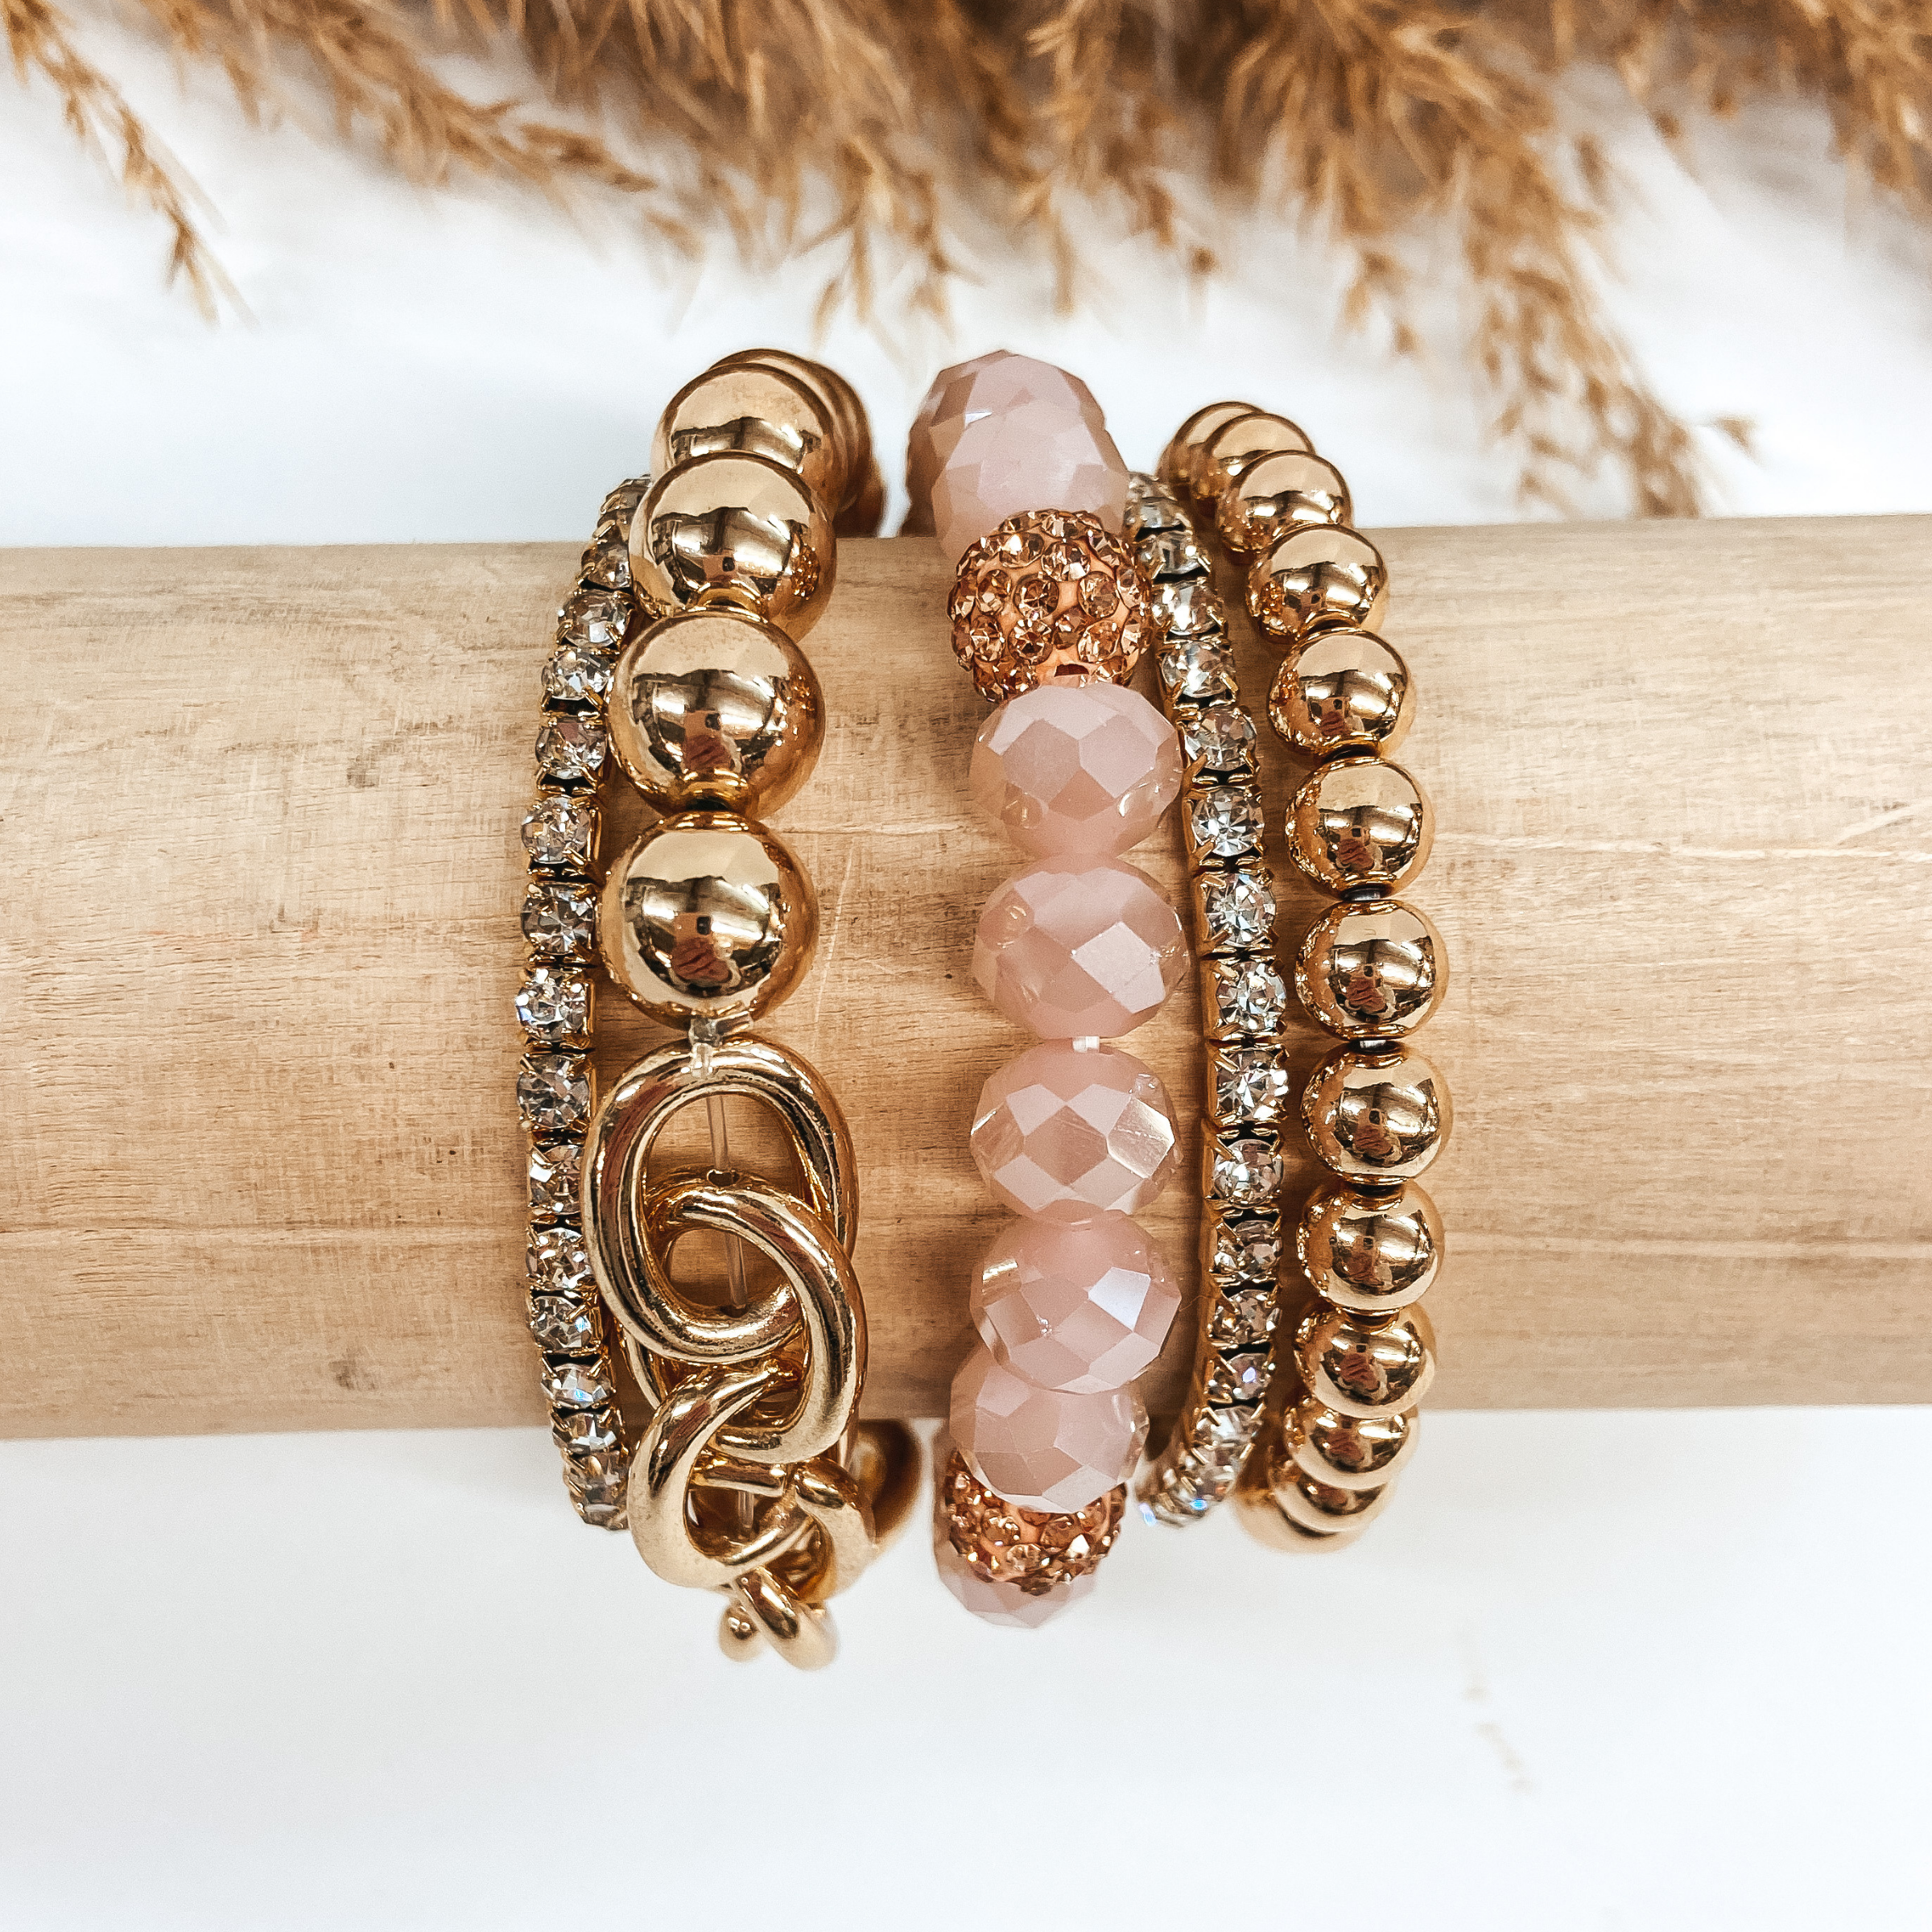 A mix of crystal and gold beaded bracelets placed on a wooden slat. Pictured on a white background with pampas grass.